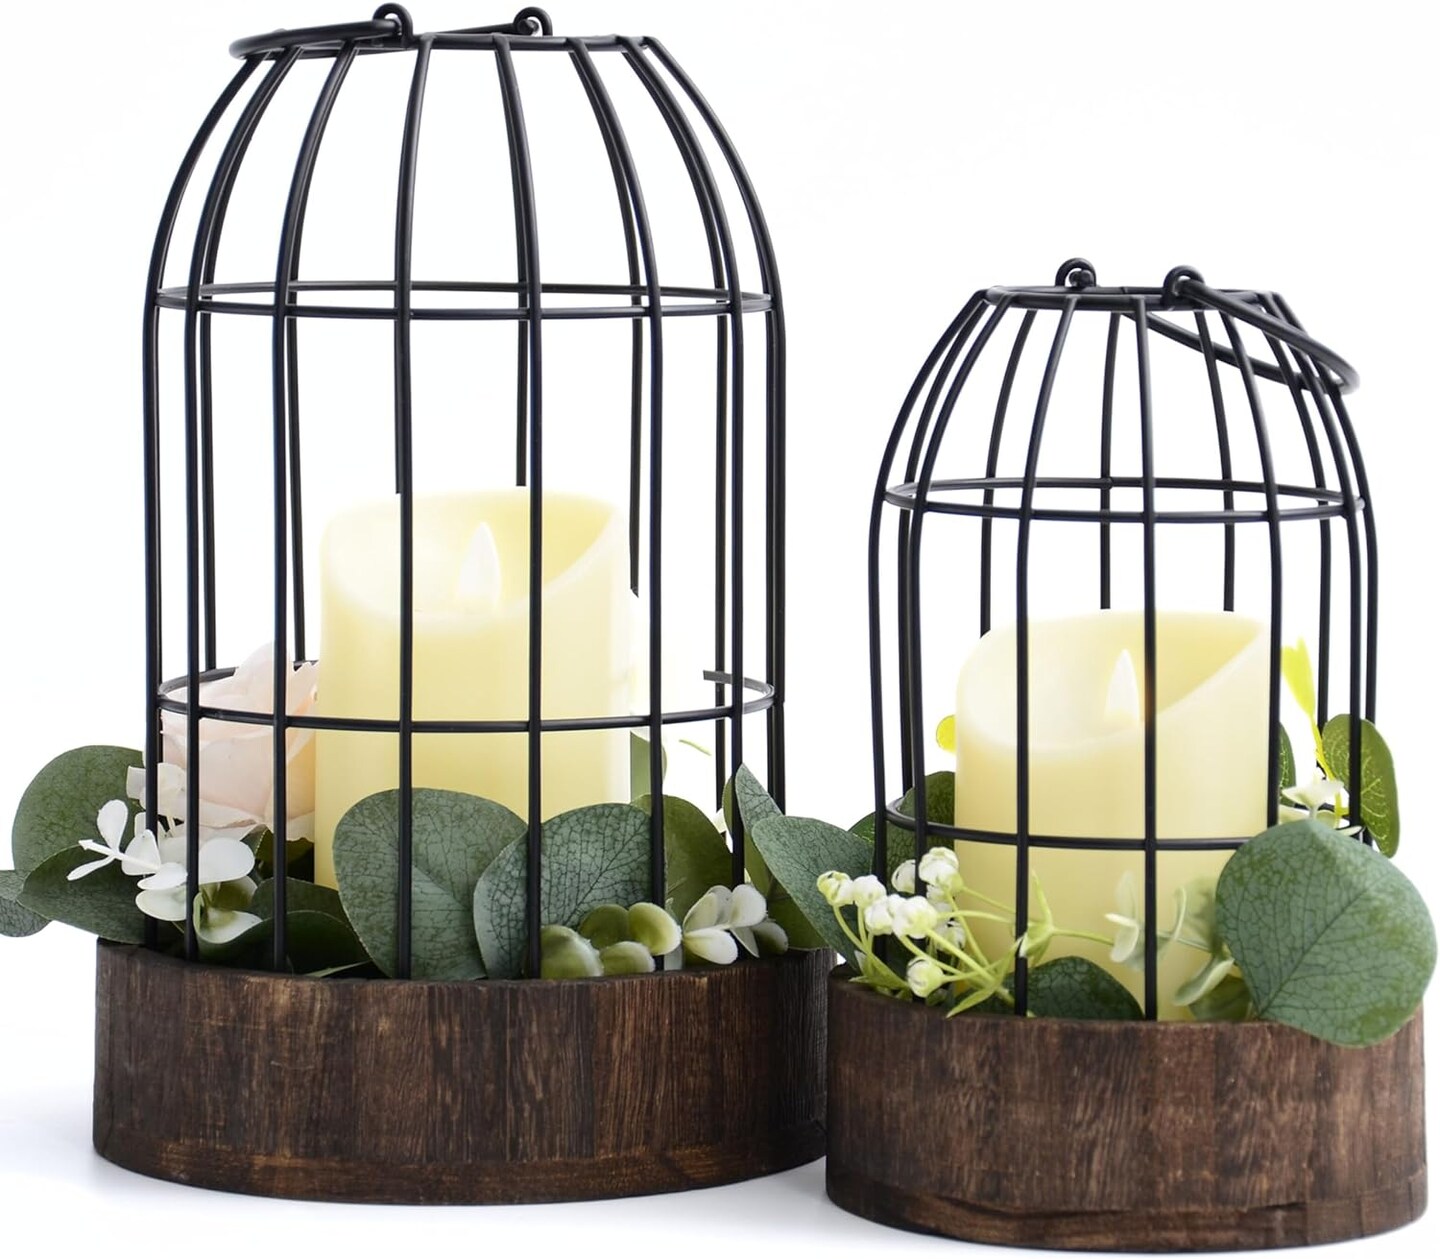 Set of 2 Rustic Table Lanterns for Home Decor